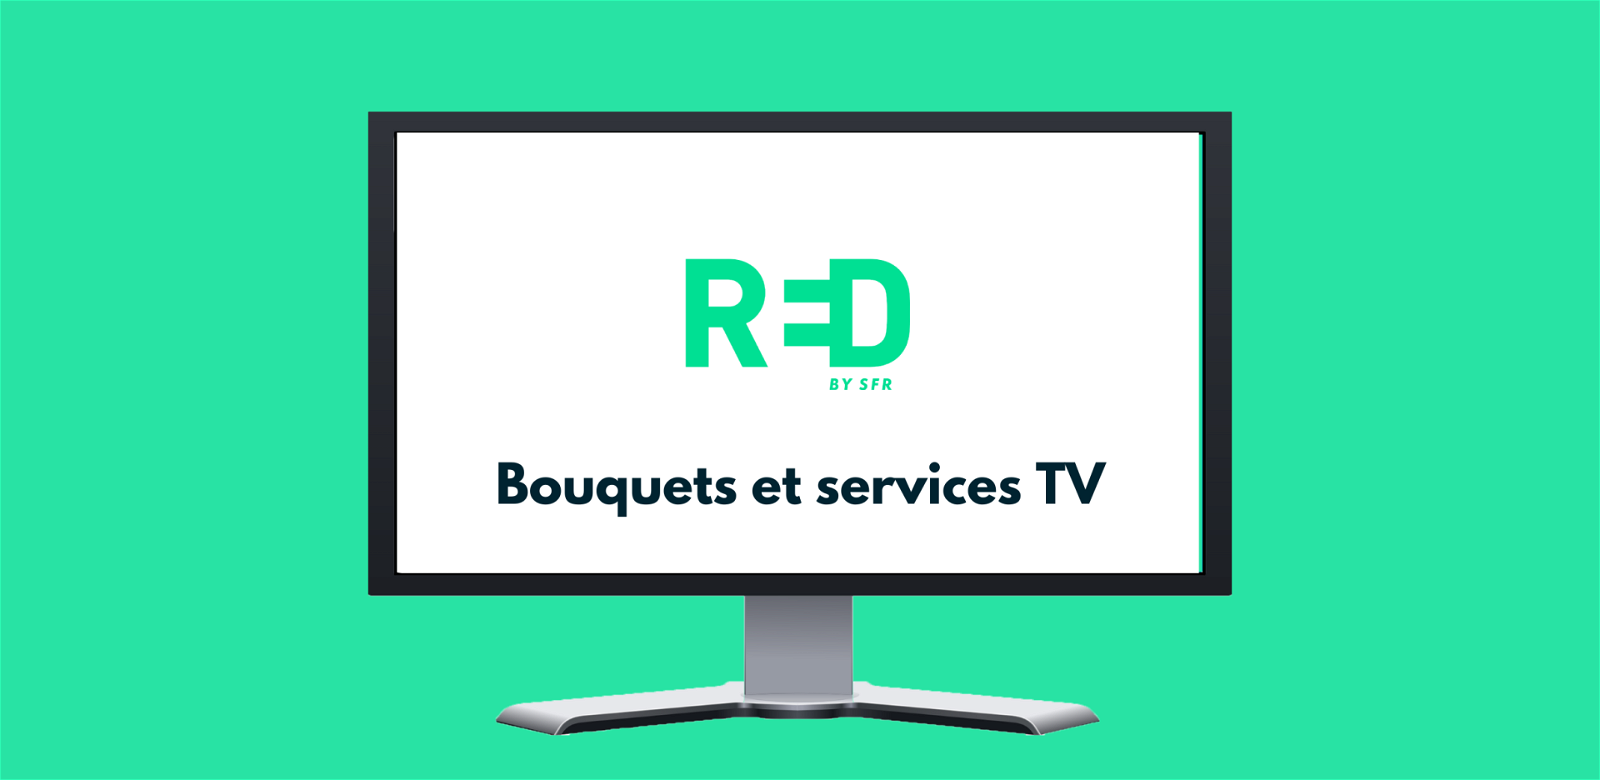 RED TV : chaines, bouquets et service TV